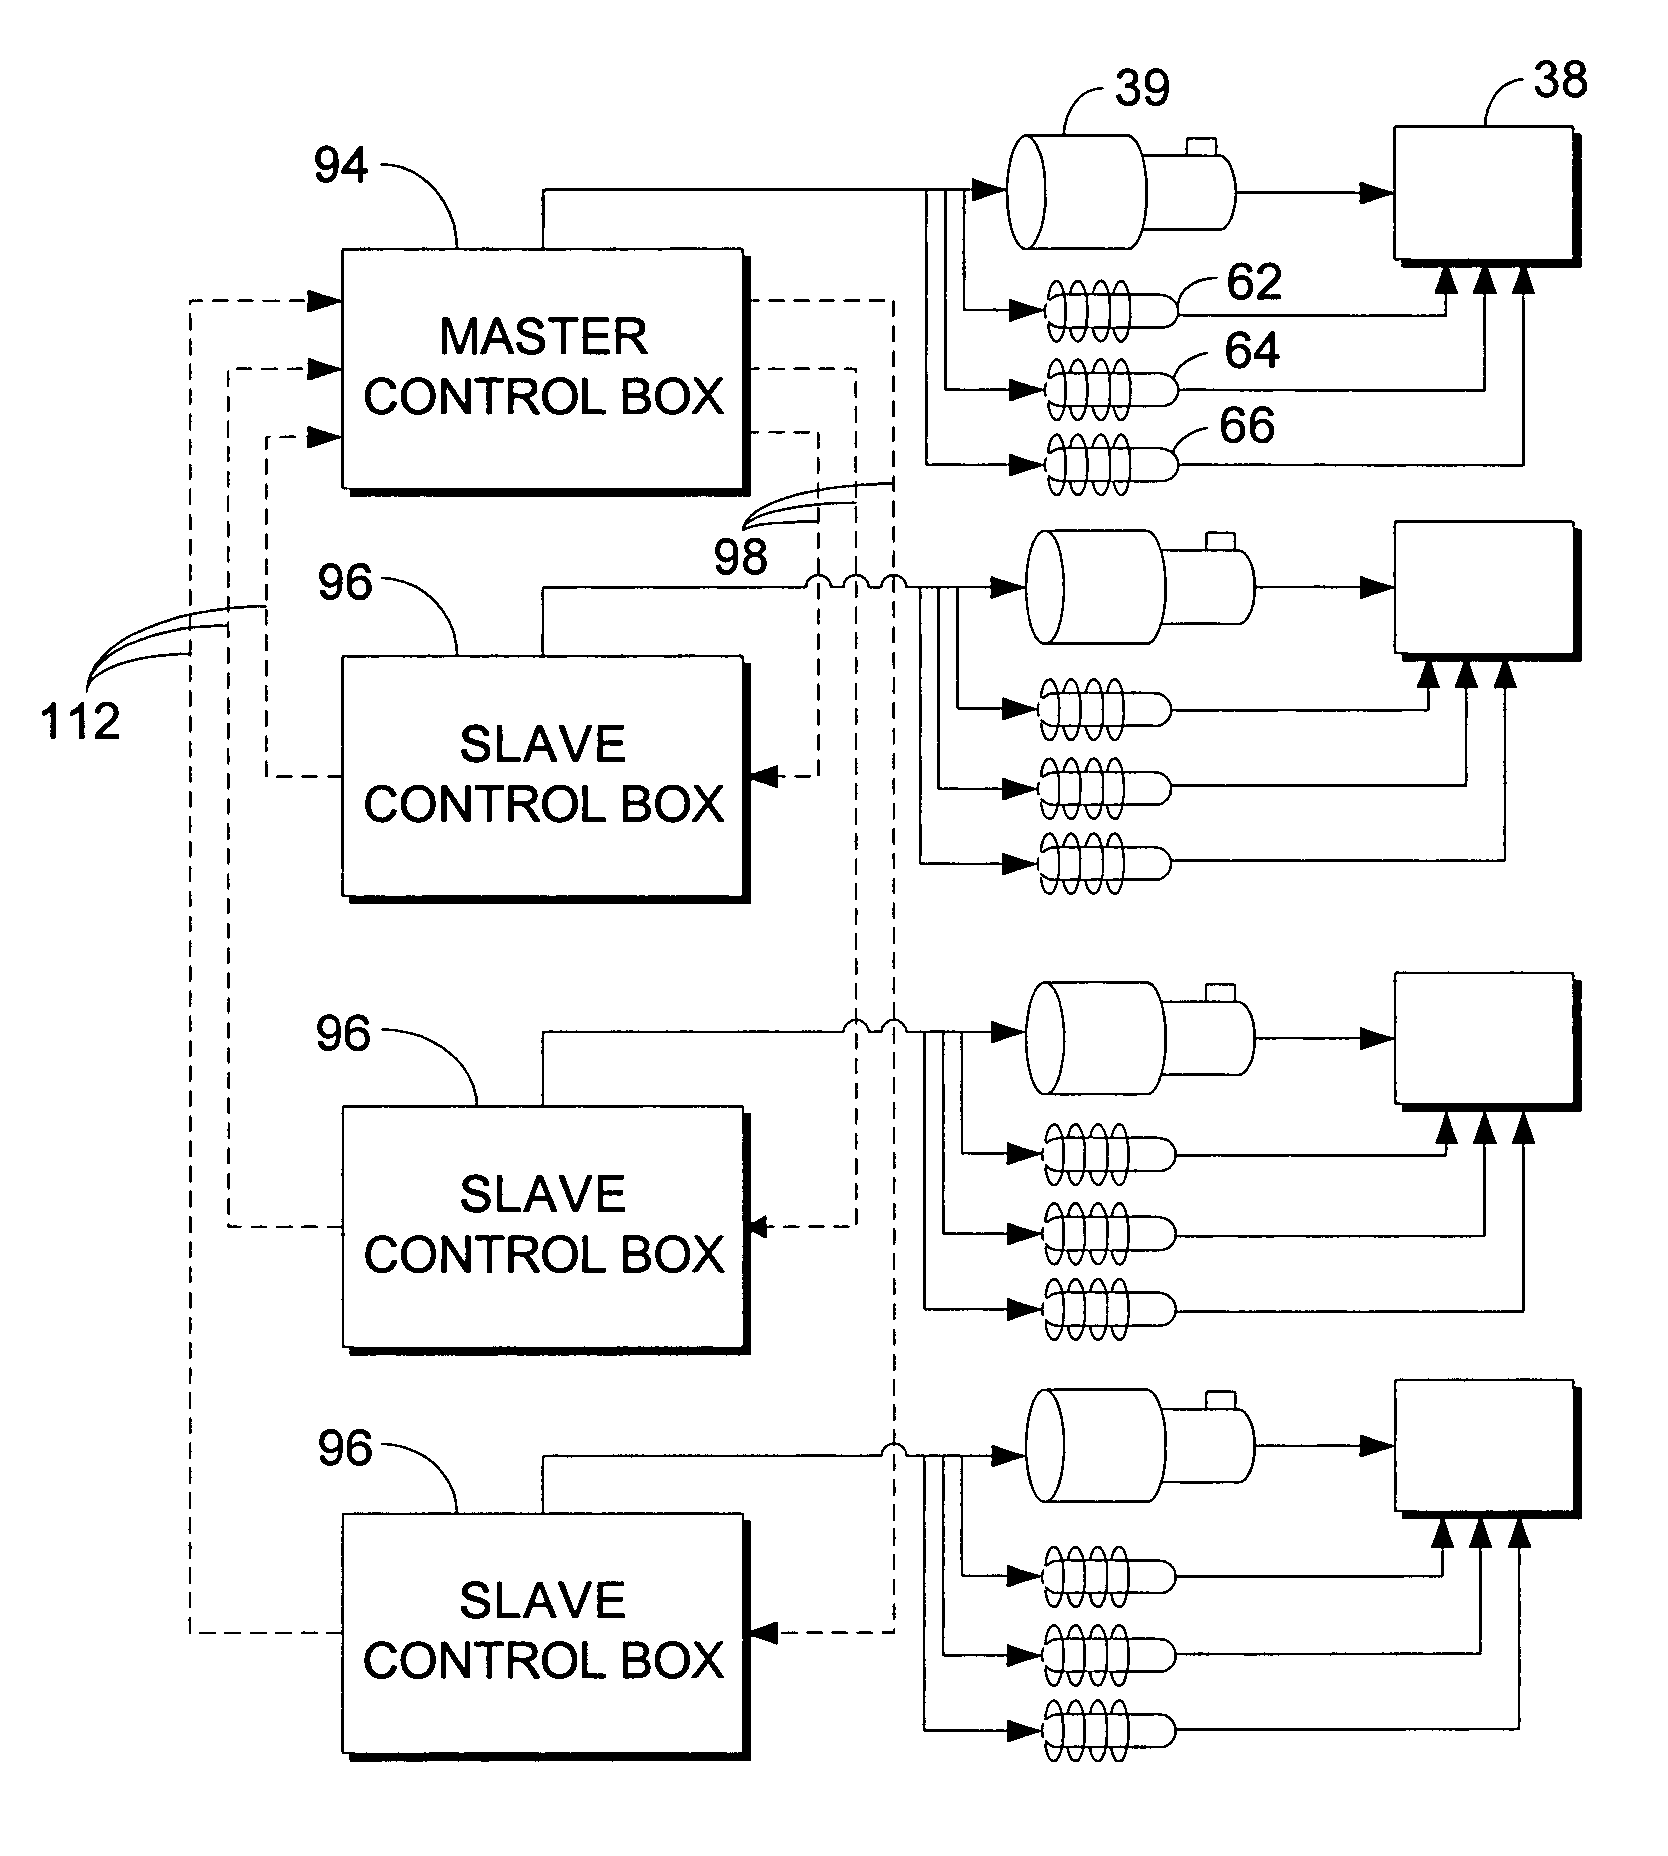 Coordinated lift system with user selectable RF channels